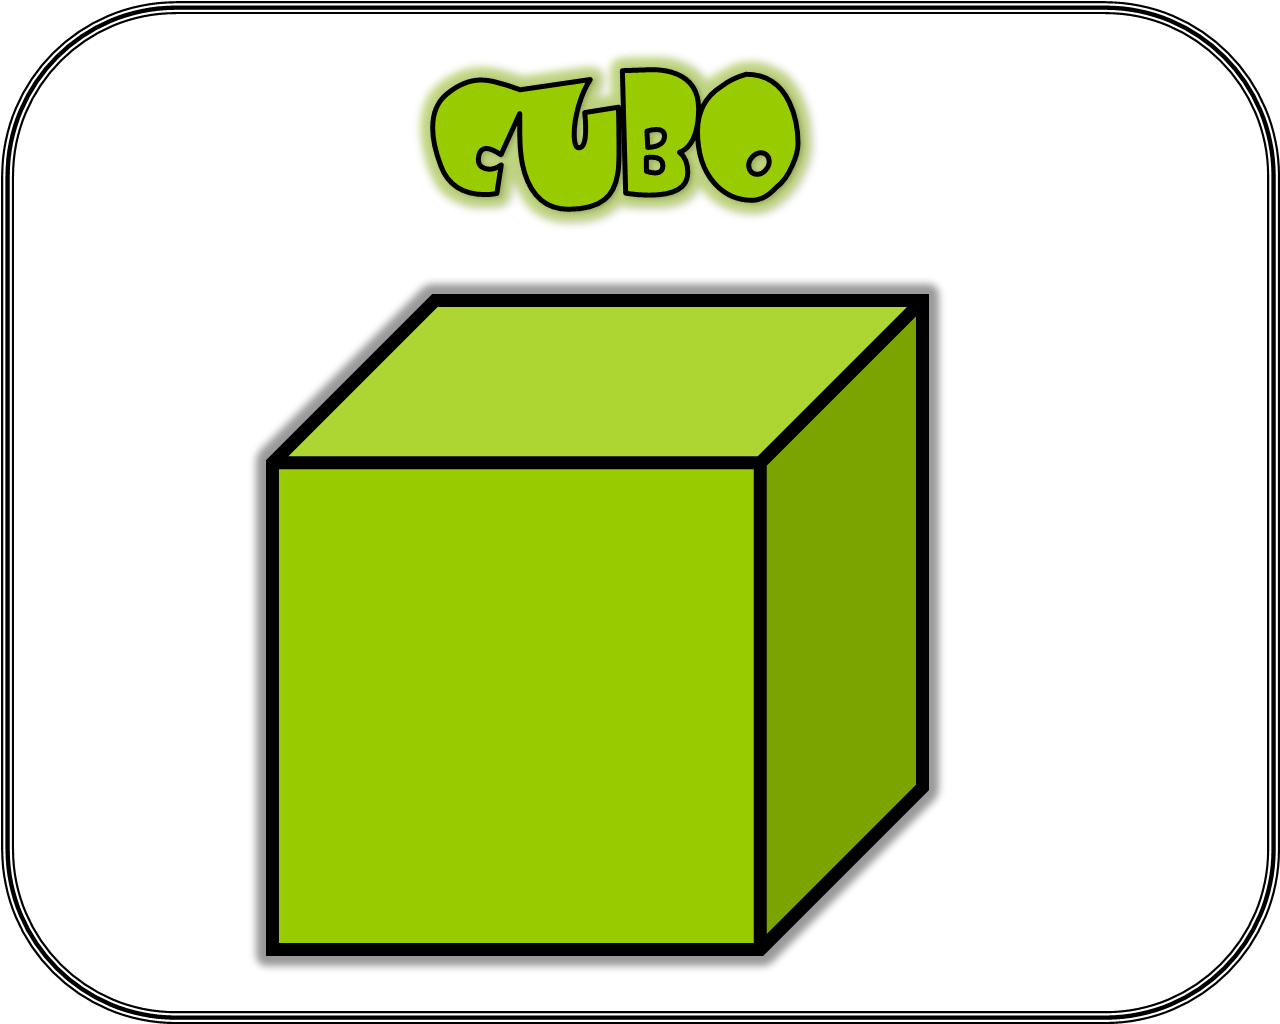 [100+] Cubo Png Images | Wallpapers.com